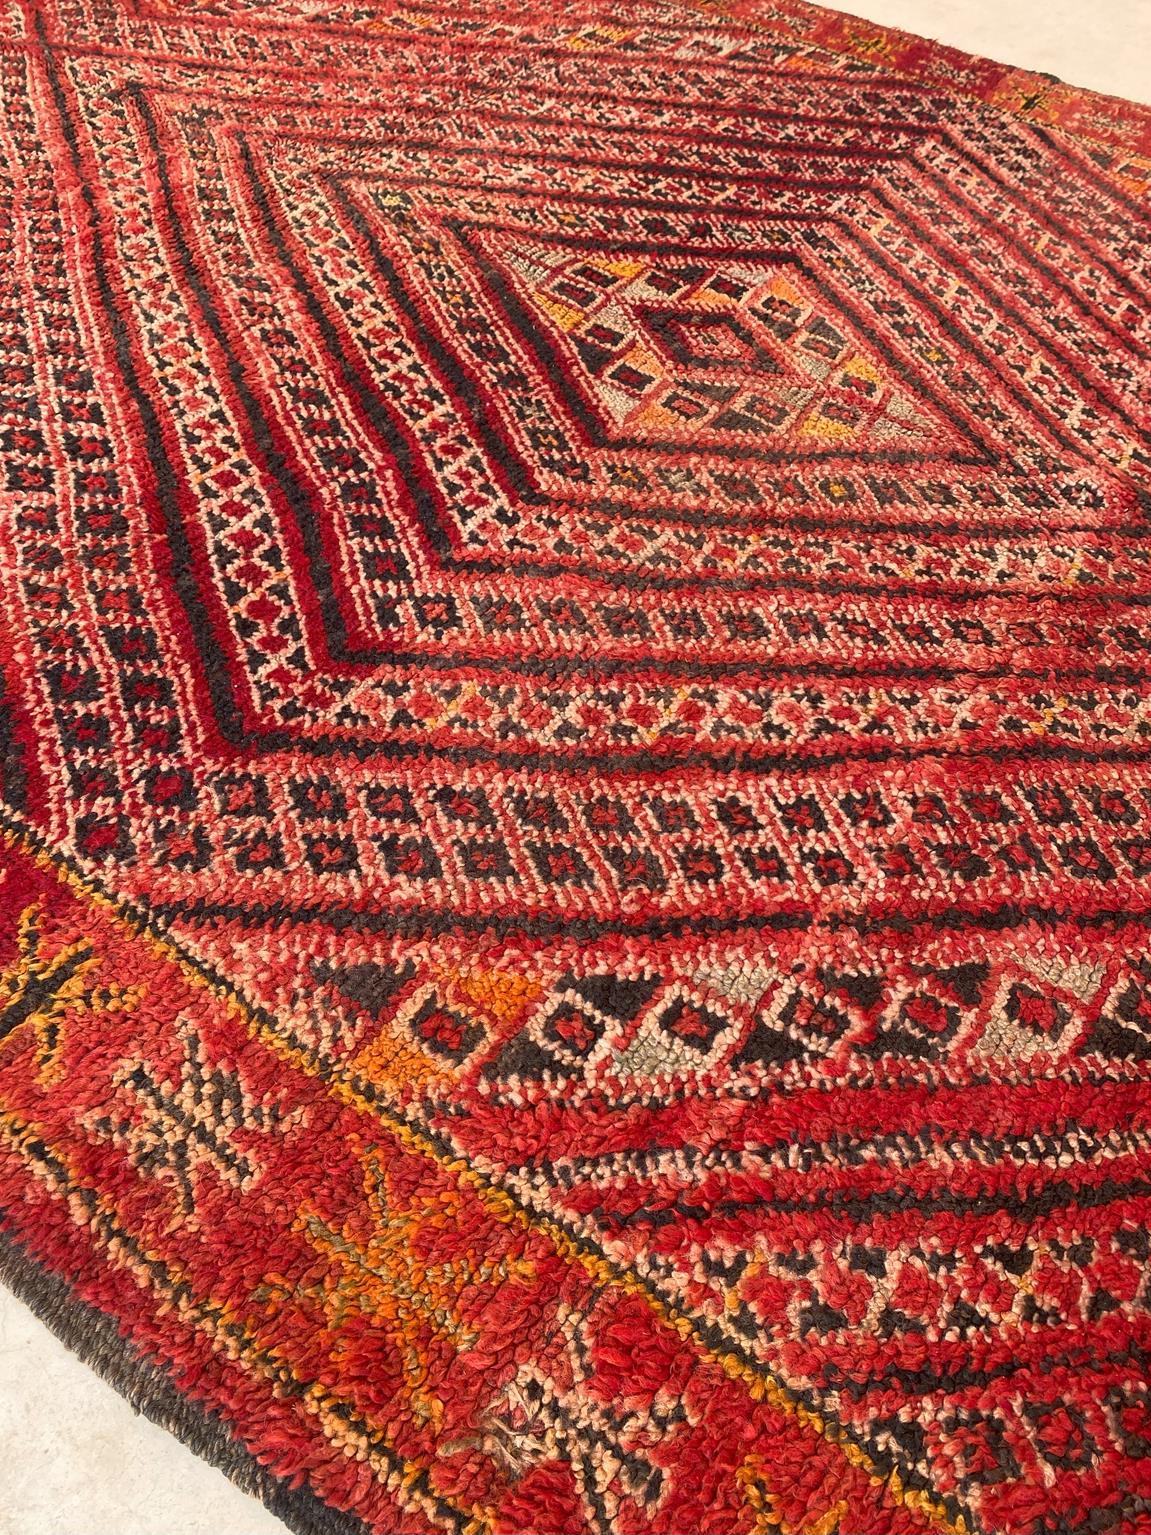 20th Century Vintage Moroccan Zayane rug - Red - 6.7x11.3feet / 205x344cm For Sale